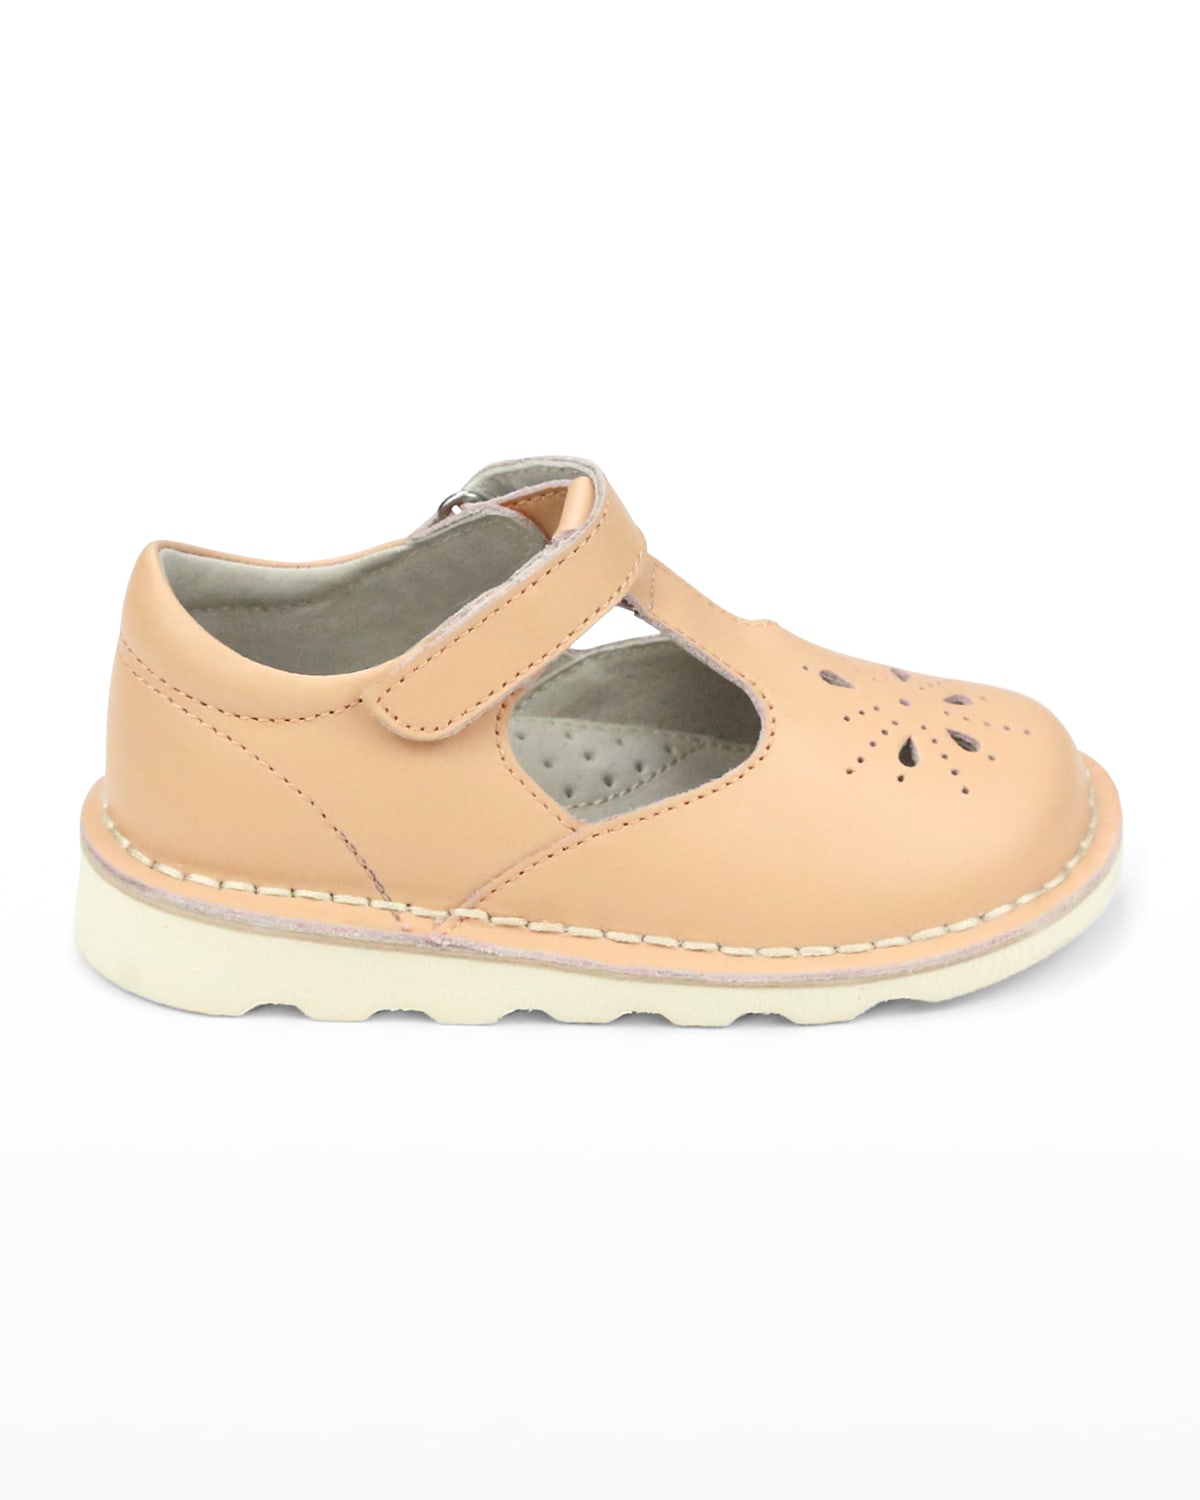 L'amour Shoes Girl's Alix Leather Cutout Mary Jane, Baby/toddler/kid In Apricot